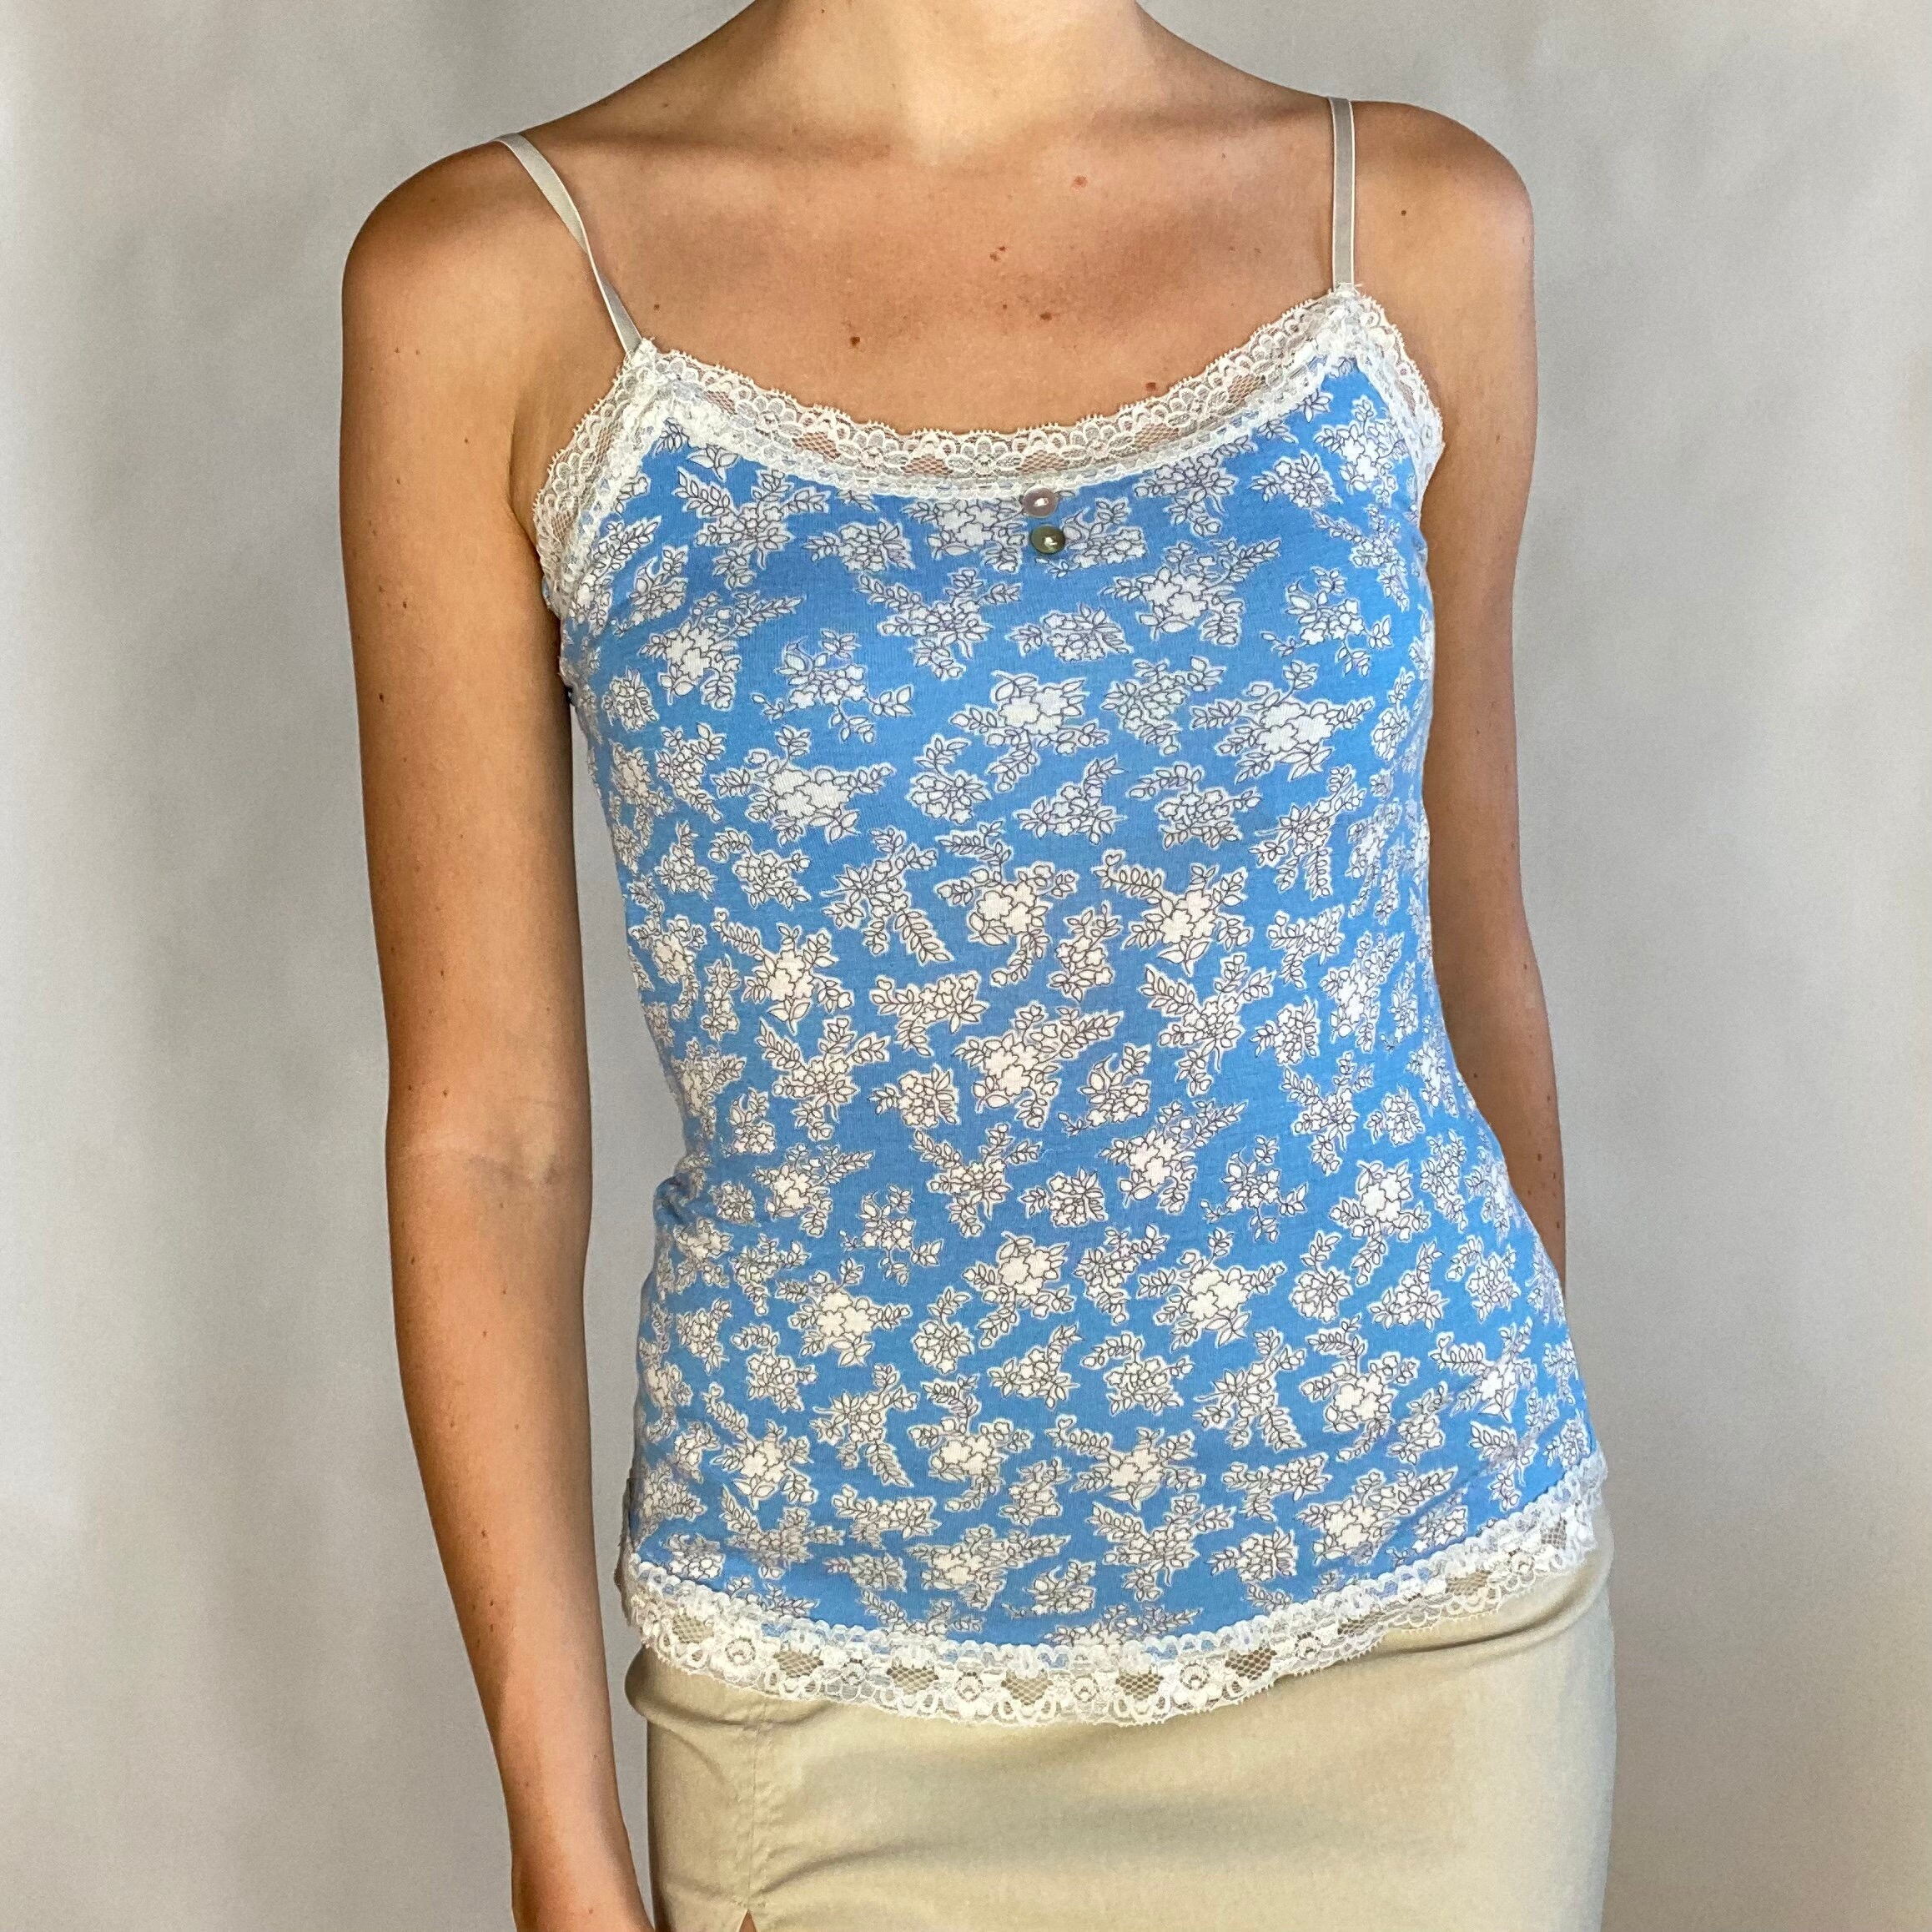 Vintage Blue White Lace Trim Floral Tank Lingerie Type Top / Y2K 90s  Aesthetic Clothing -  Canada